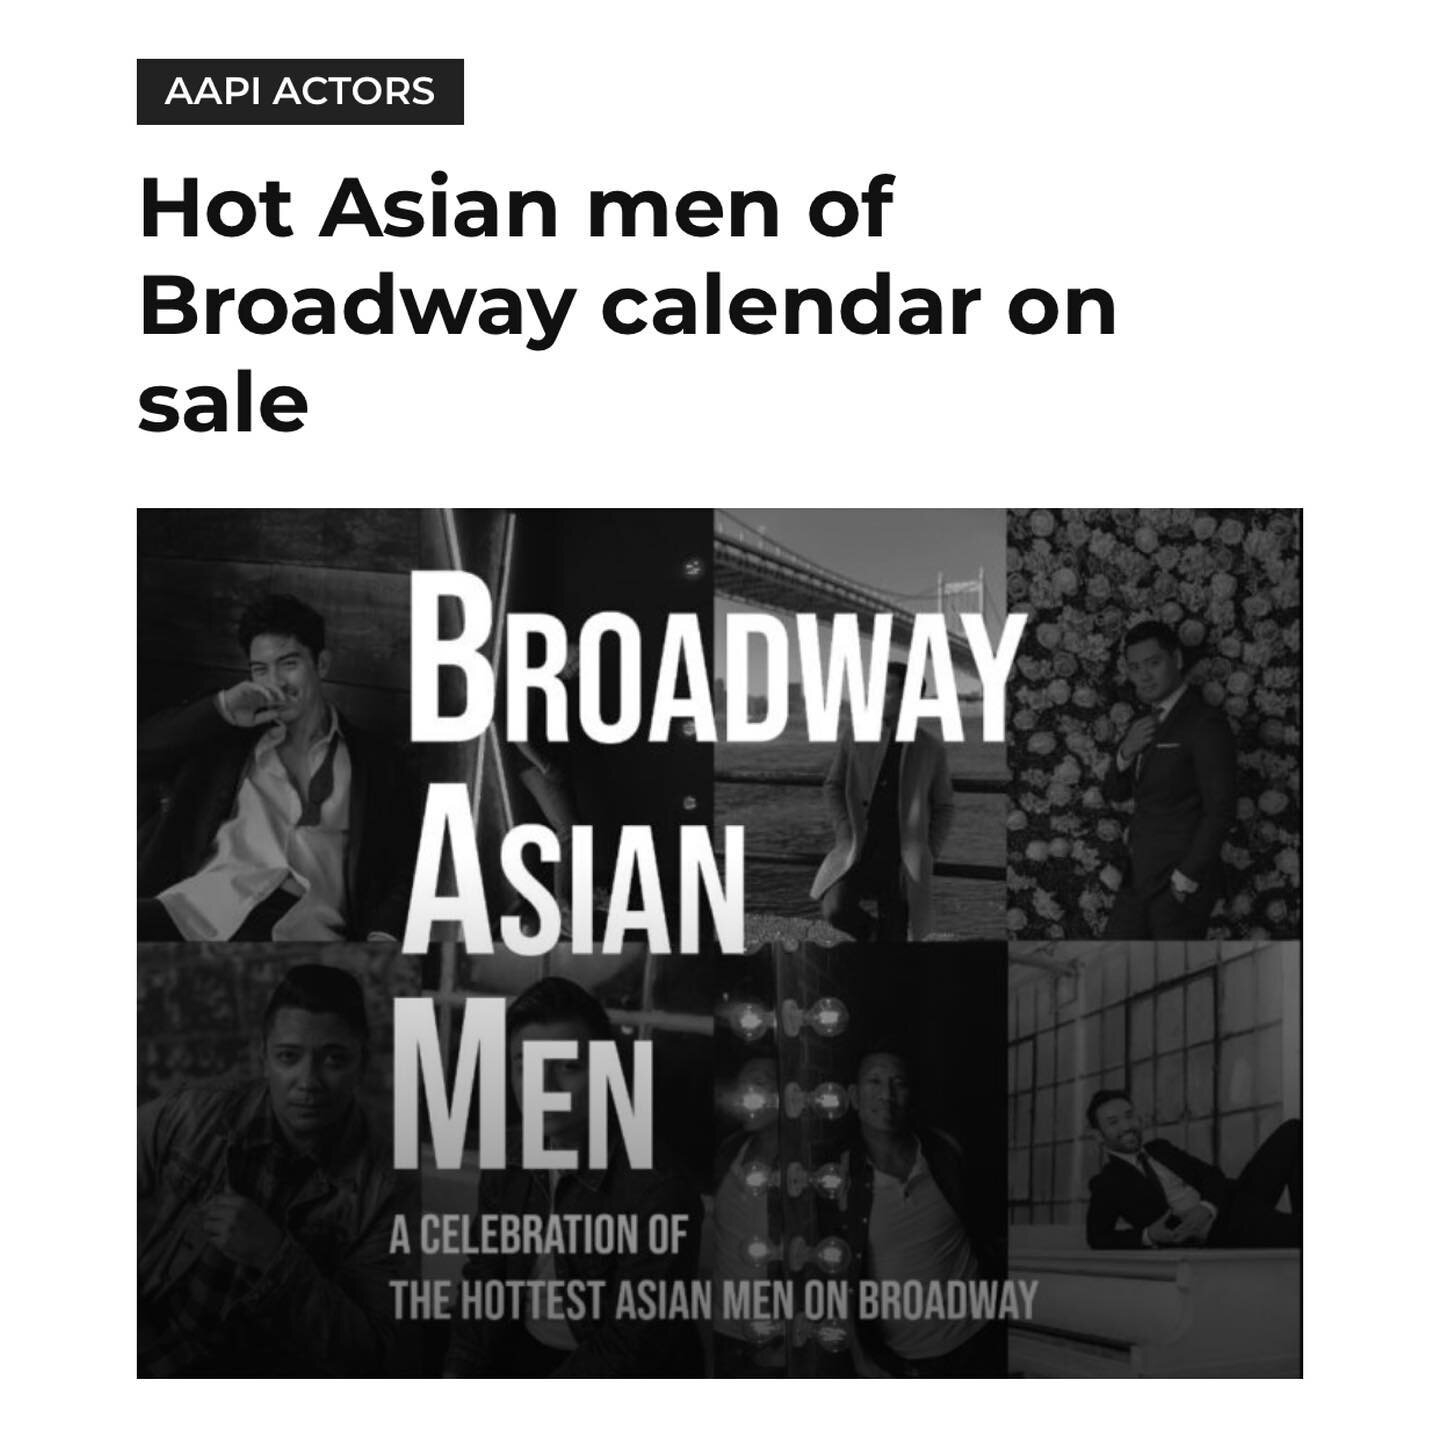 BAM! The B*roadway A*sian M*en 2021 calendar is officially on sale TODAY!!! I think this would make anyone&rsquo;s holiday stocking rather happily stuffed 😜 (store details &amp; link below) #hohoho 
&bull;
SWIPE ⏩ to see the rejects! So what photo m